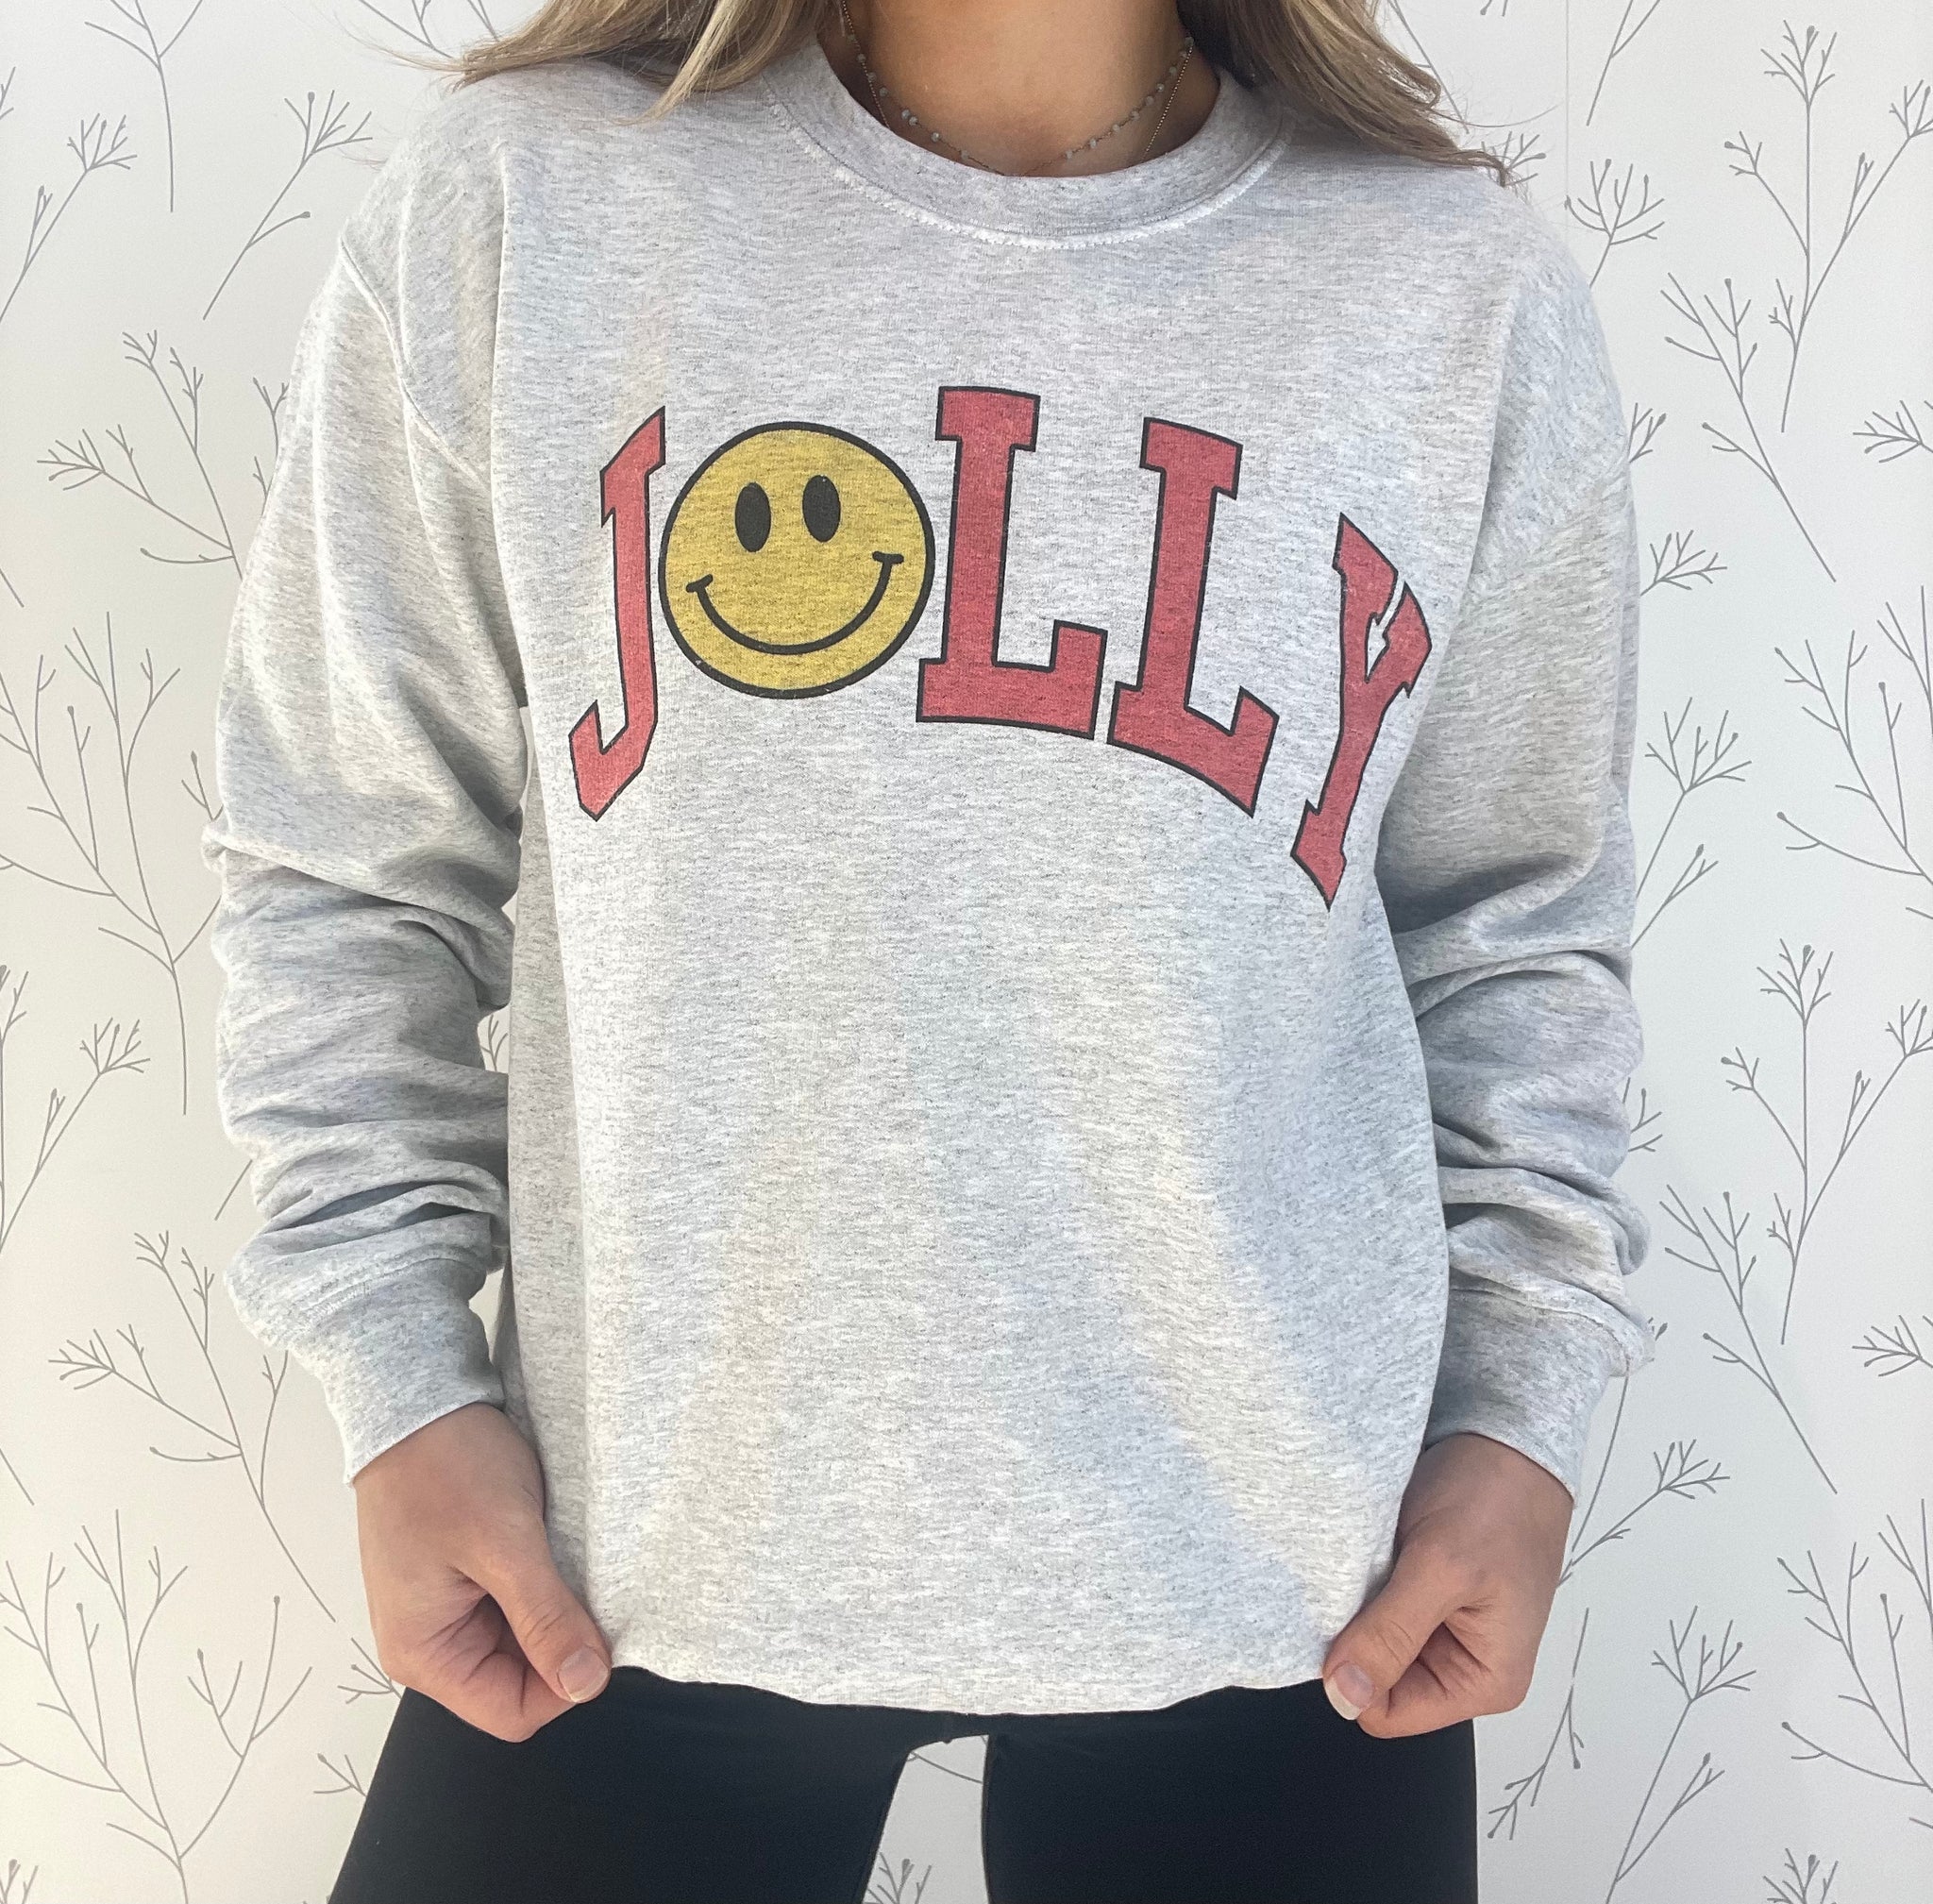 "Jolly" Graphic Pullover w/ smiley face